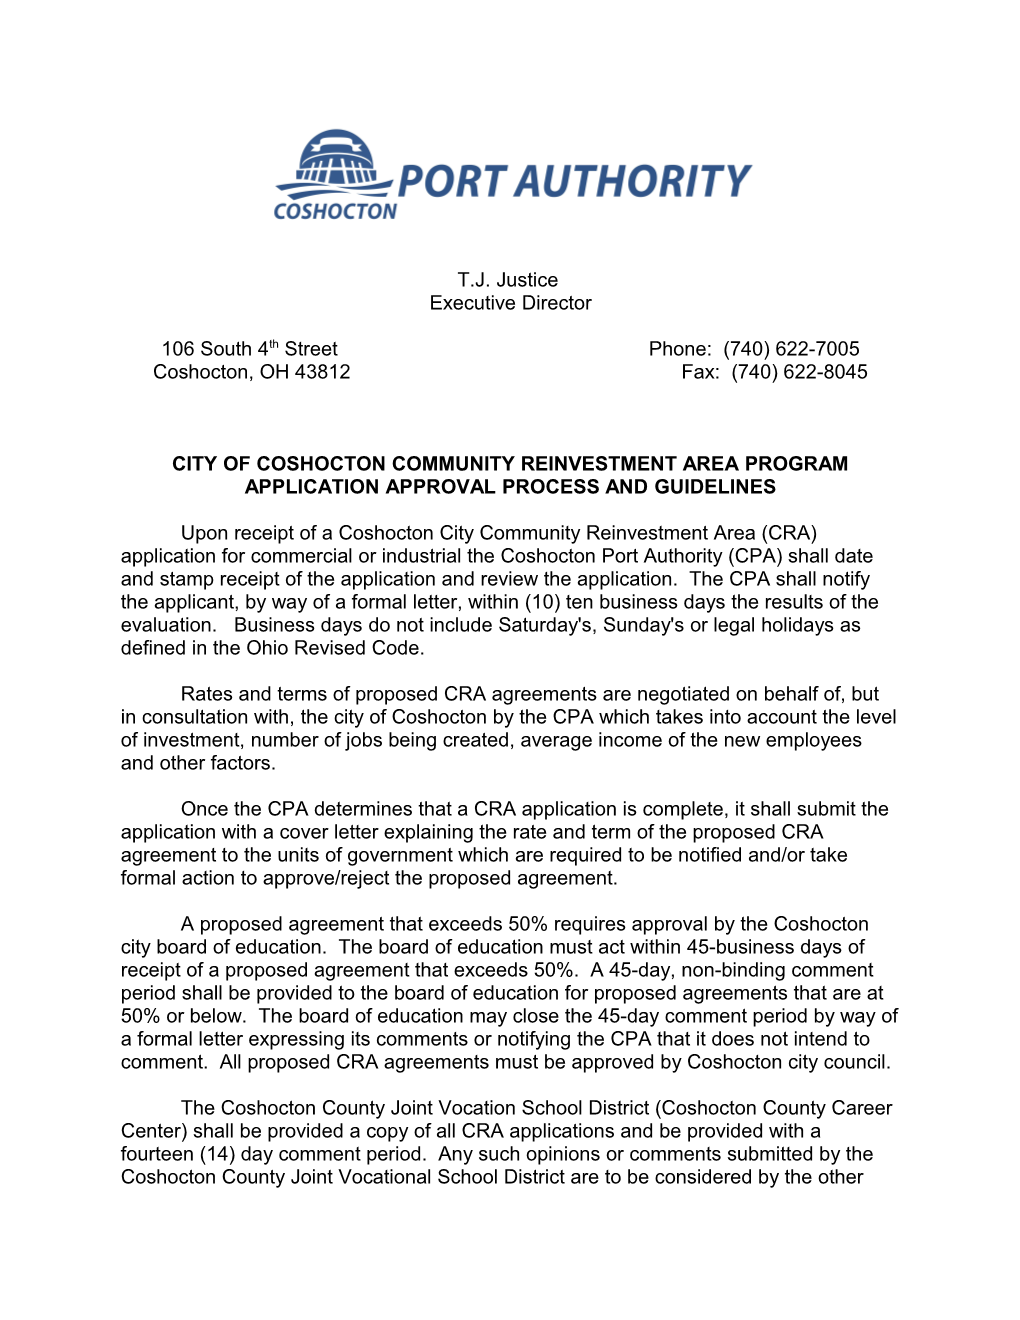 City of Coshocton Community Reinvestment Area Program Application Approval Process And